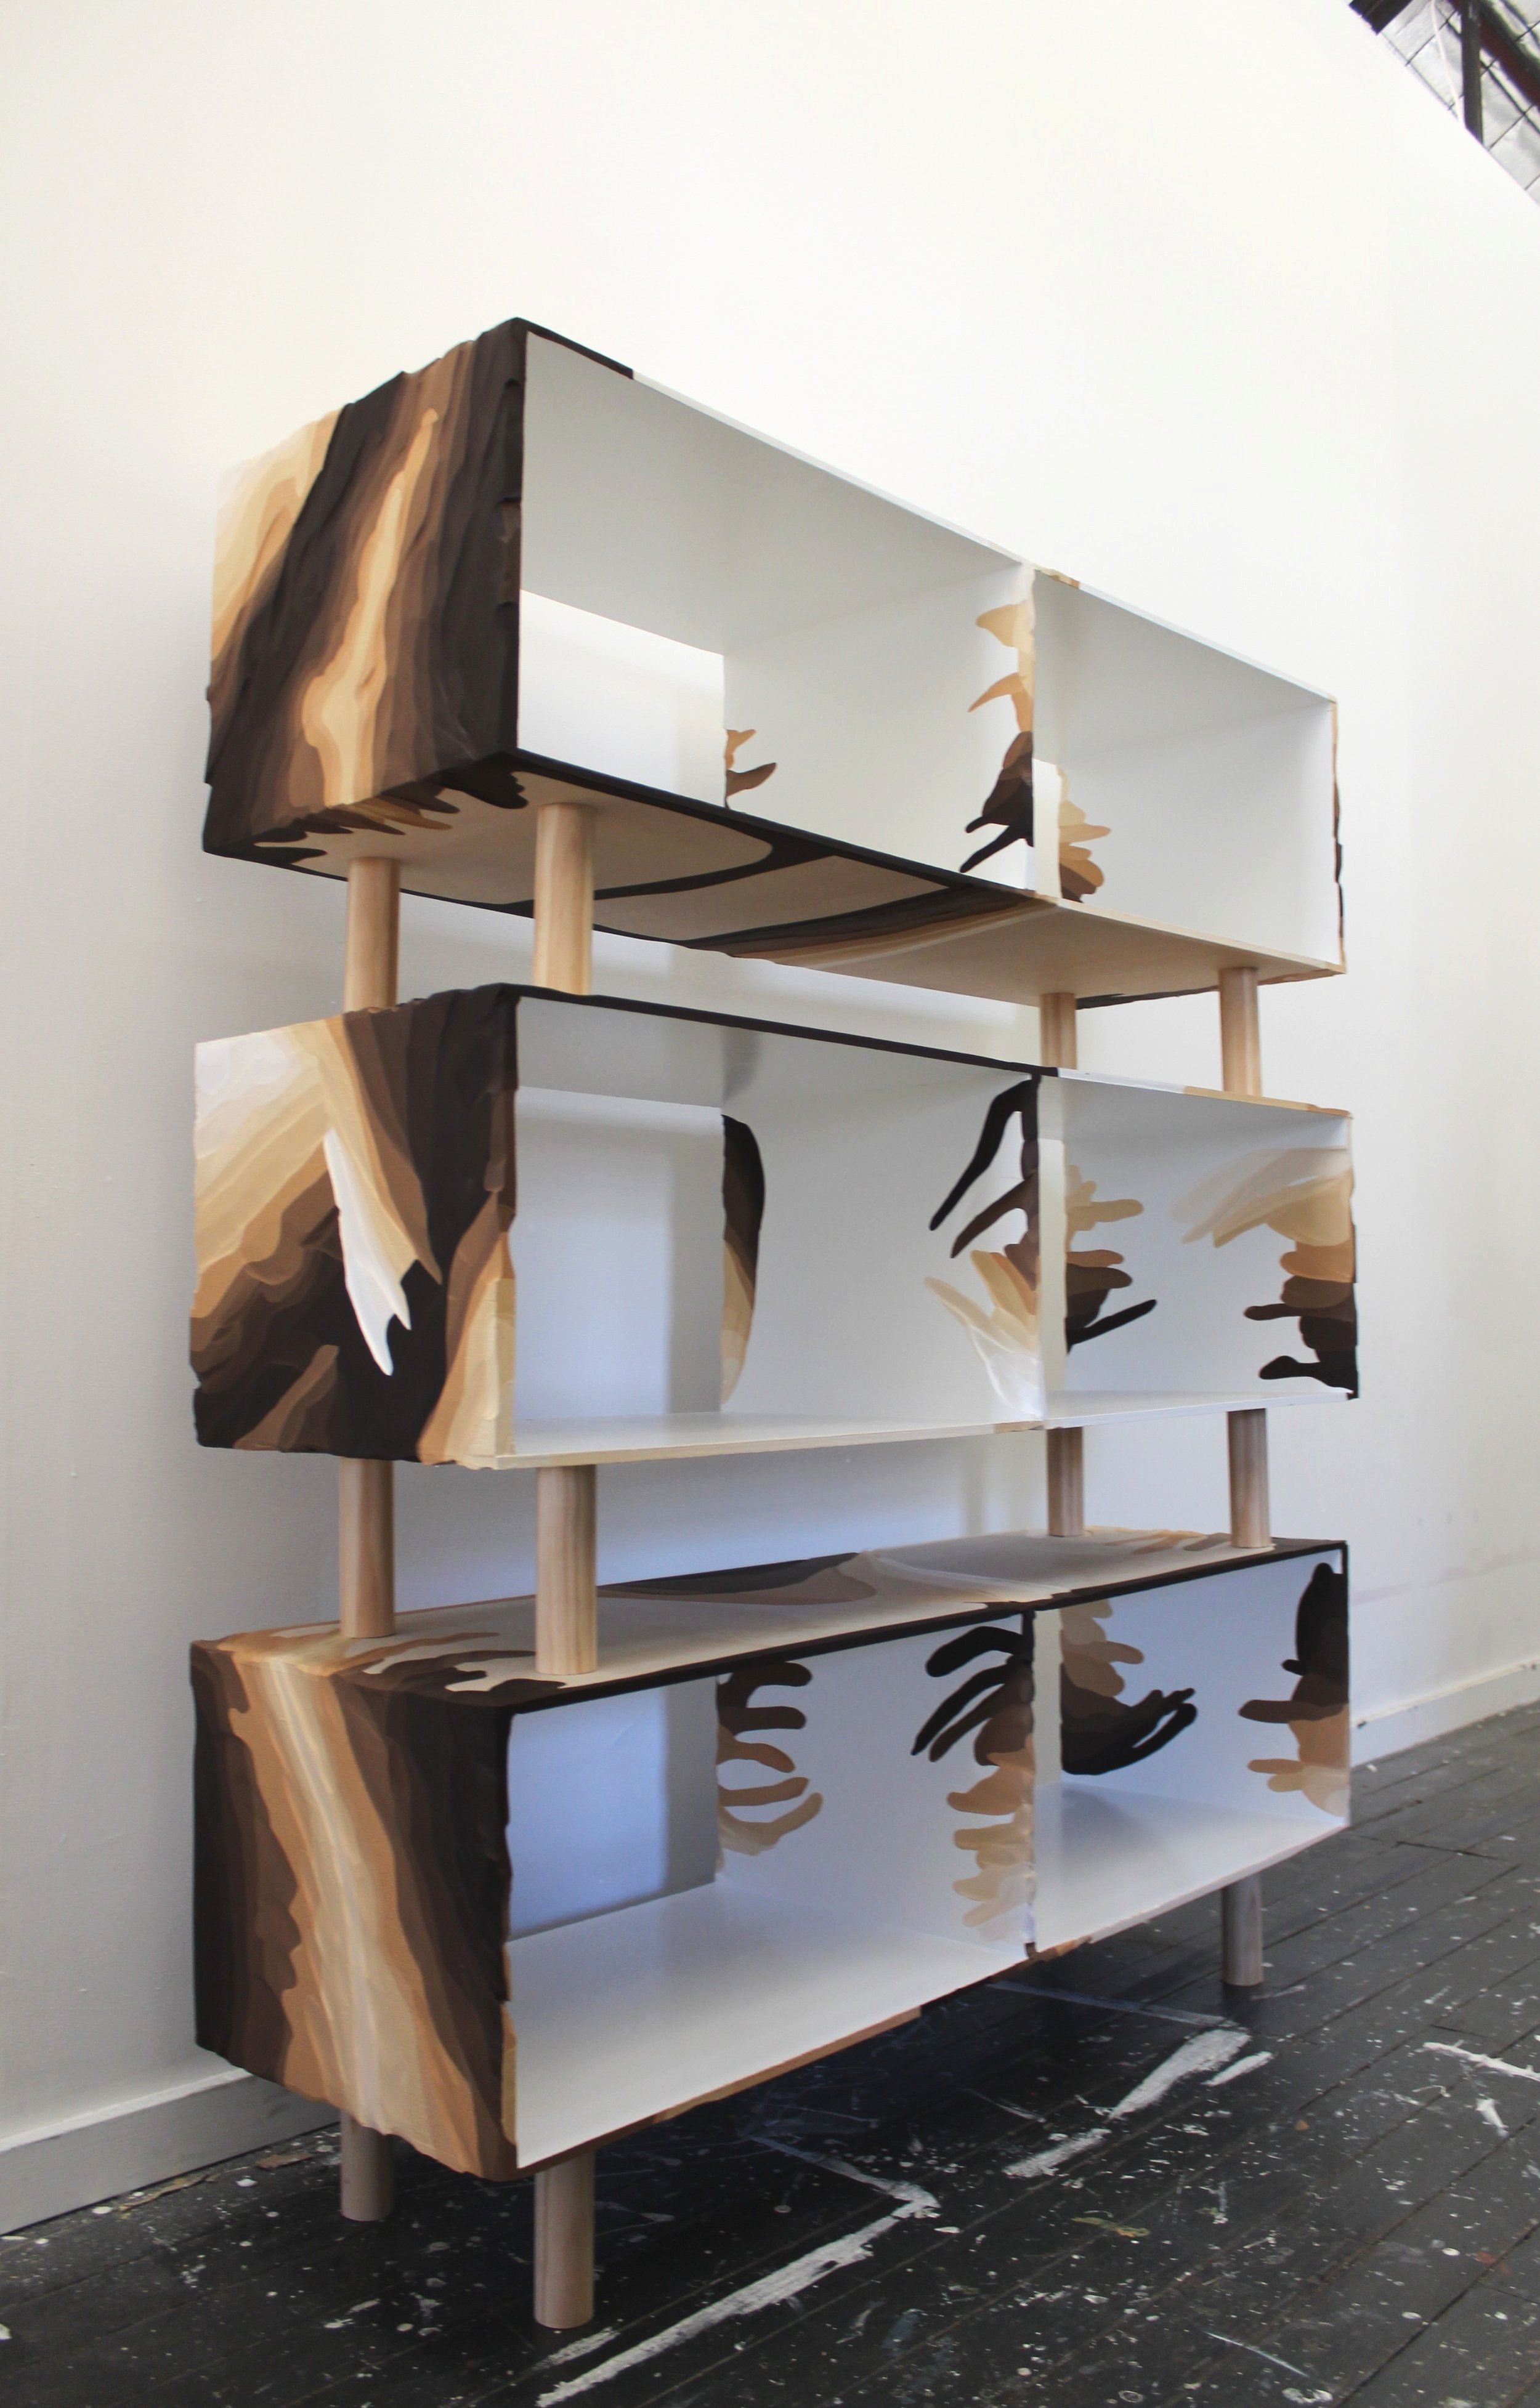   Front shot of a custom-built carved timber modular shelving unit.  This work is an expansion of my current body of work into a functionable sculpture. The modular design is a hallmark feature, allowing these individual coffee tables to seamlessly t